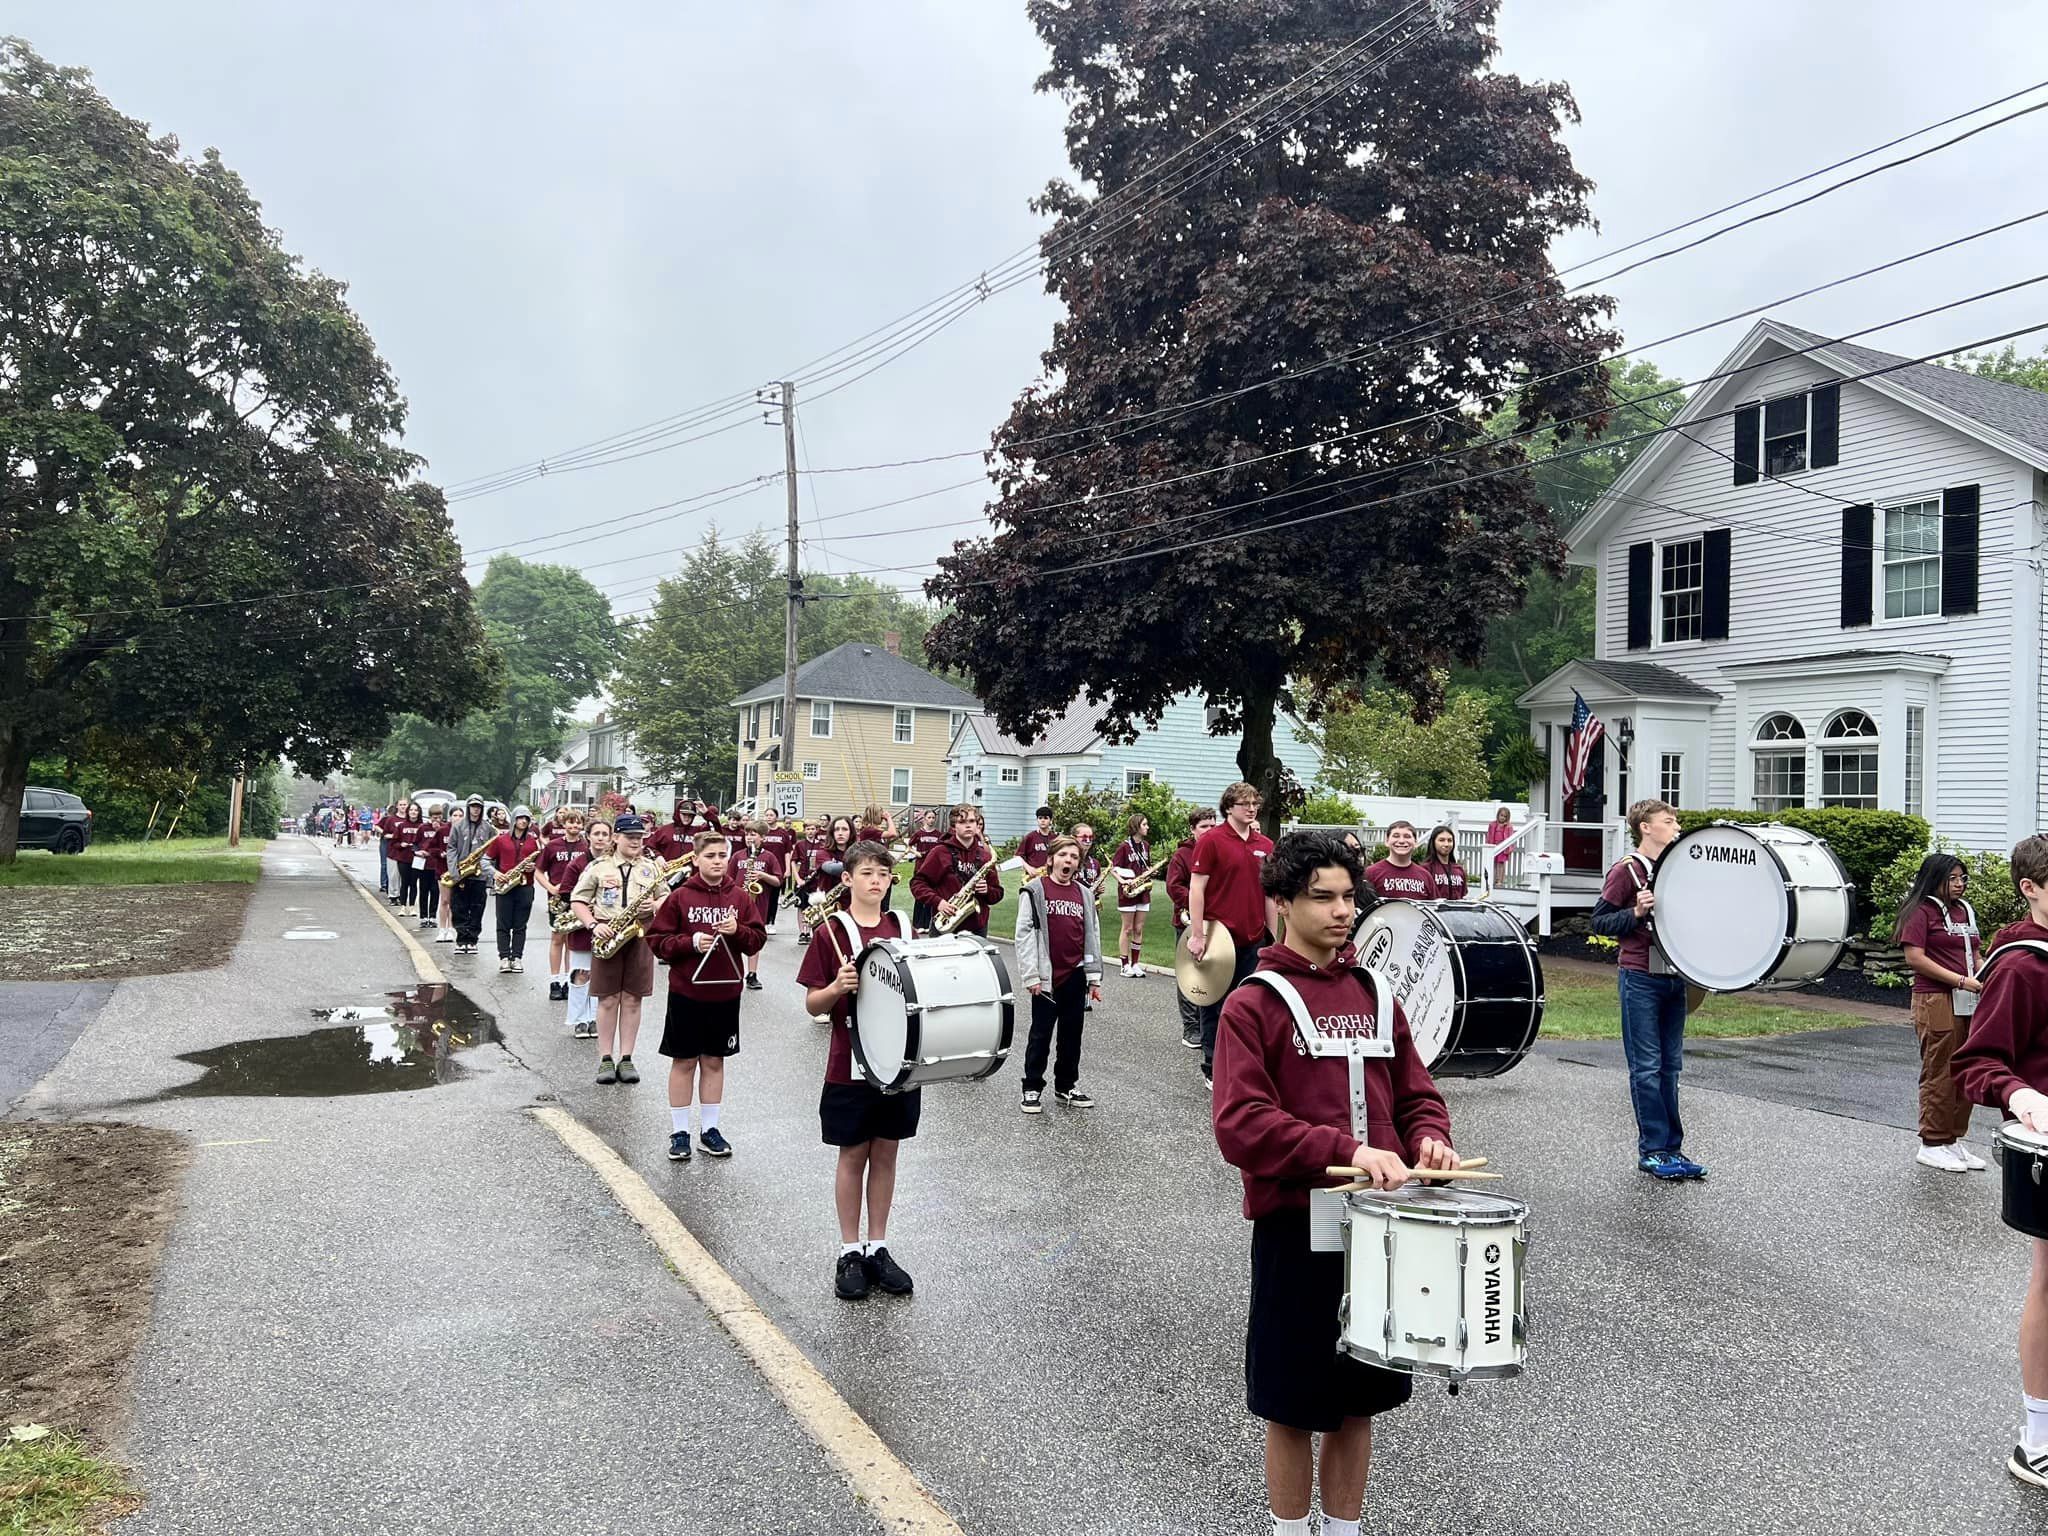 GMS & GHS Bands looked and sounded great at today's Memorial Day Parade! Thankful the rain held off!